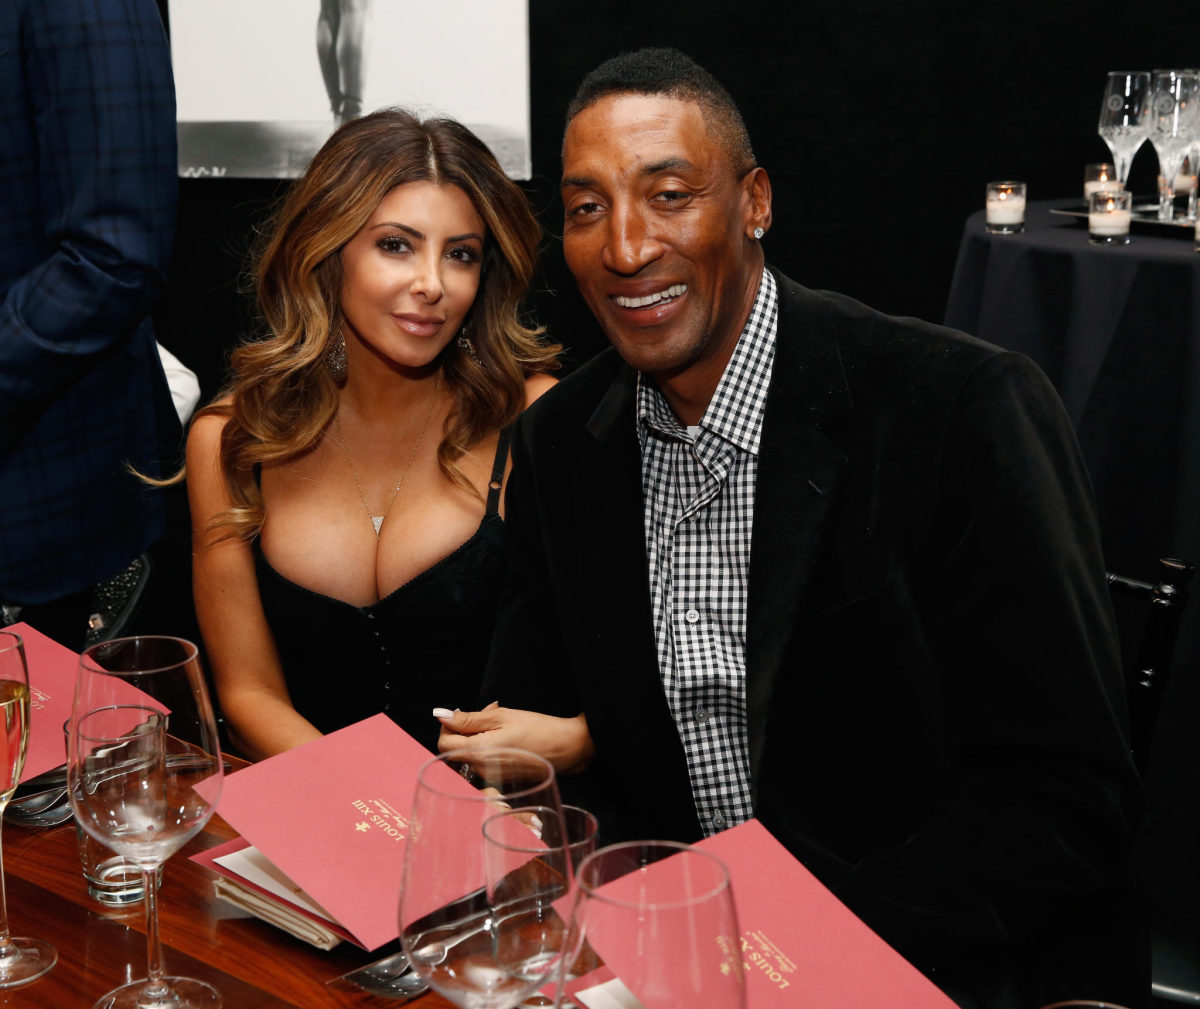 Scottie Pippen and his wife, Larsa Pippen, at a dinner.